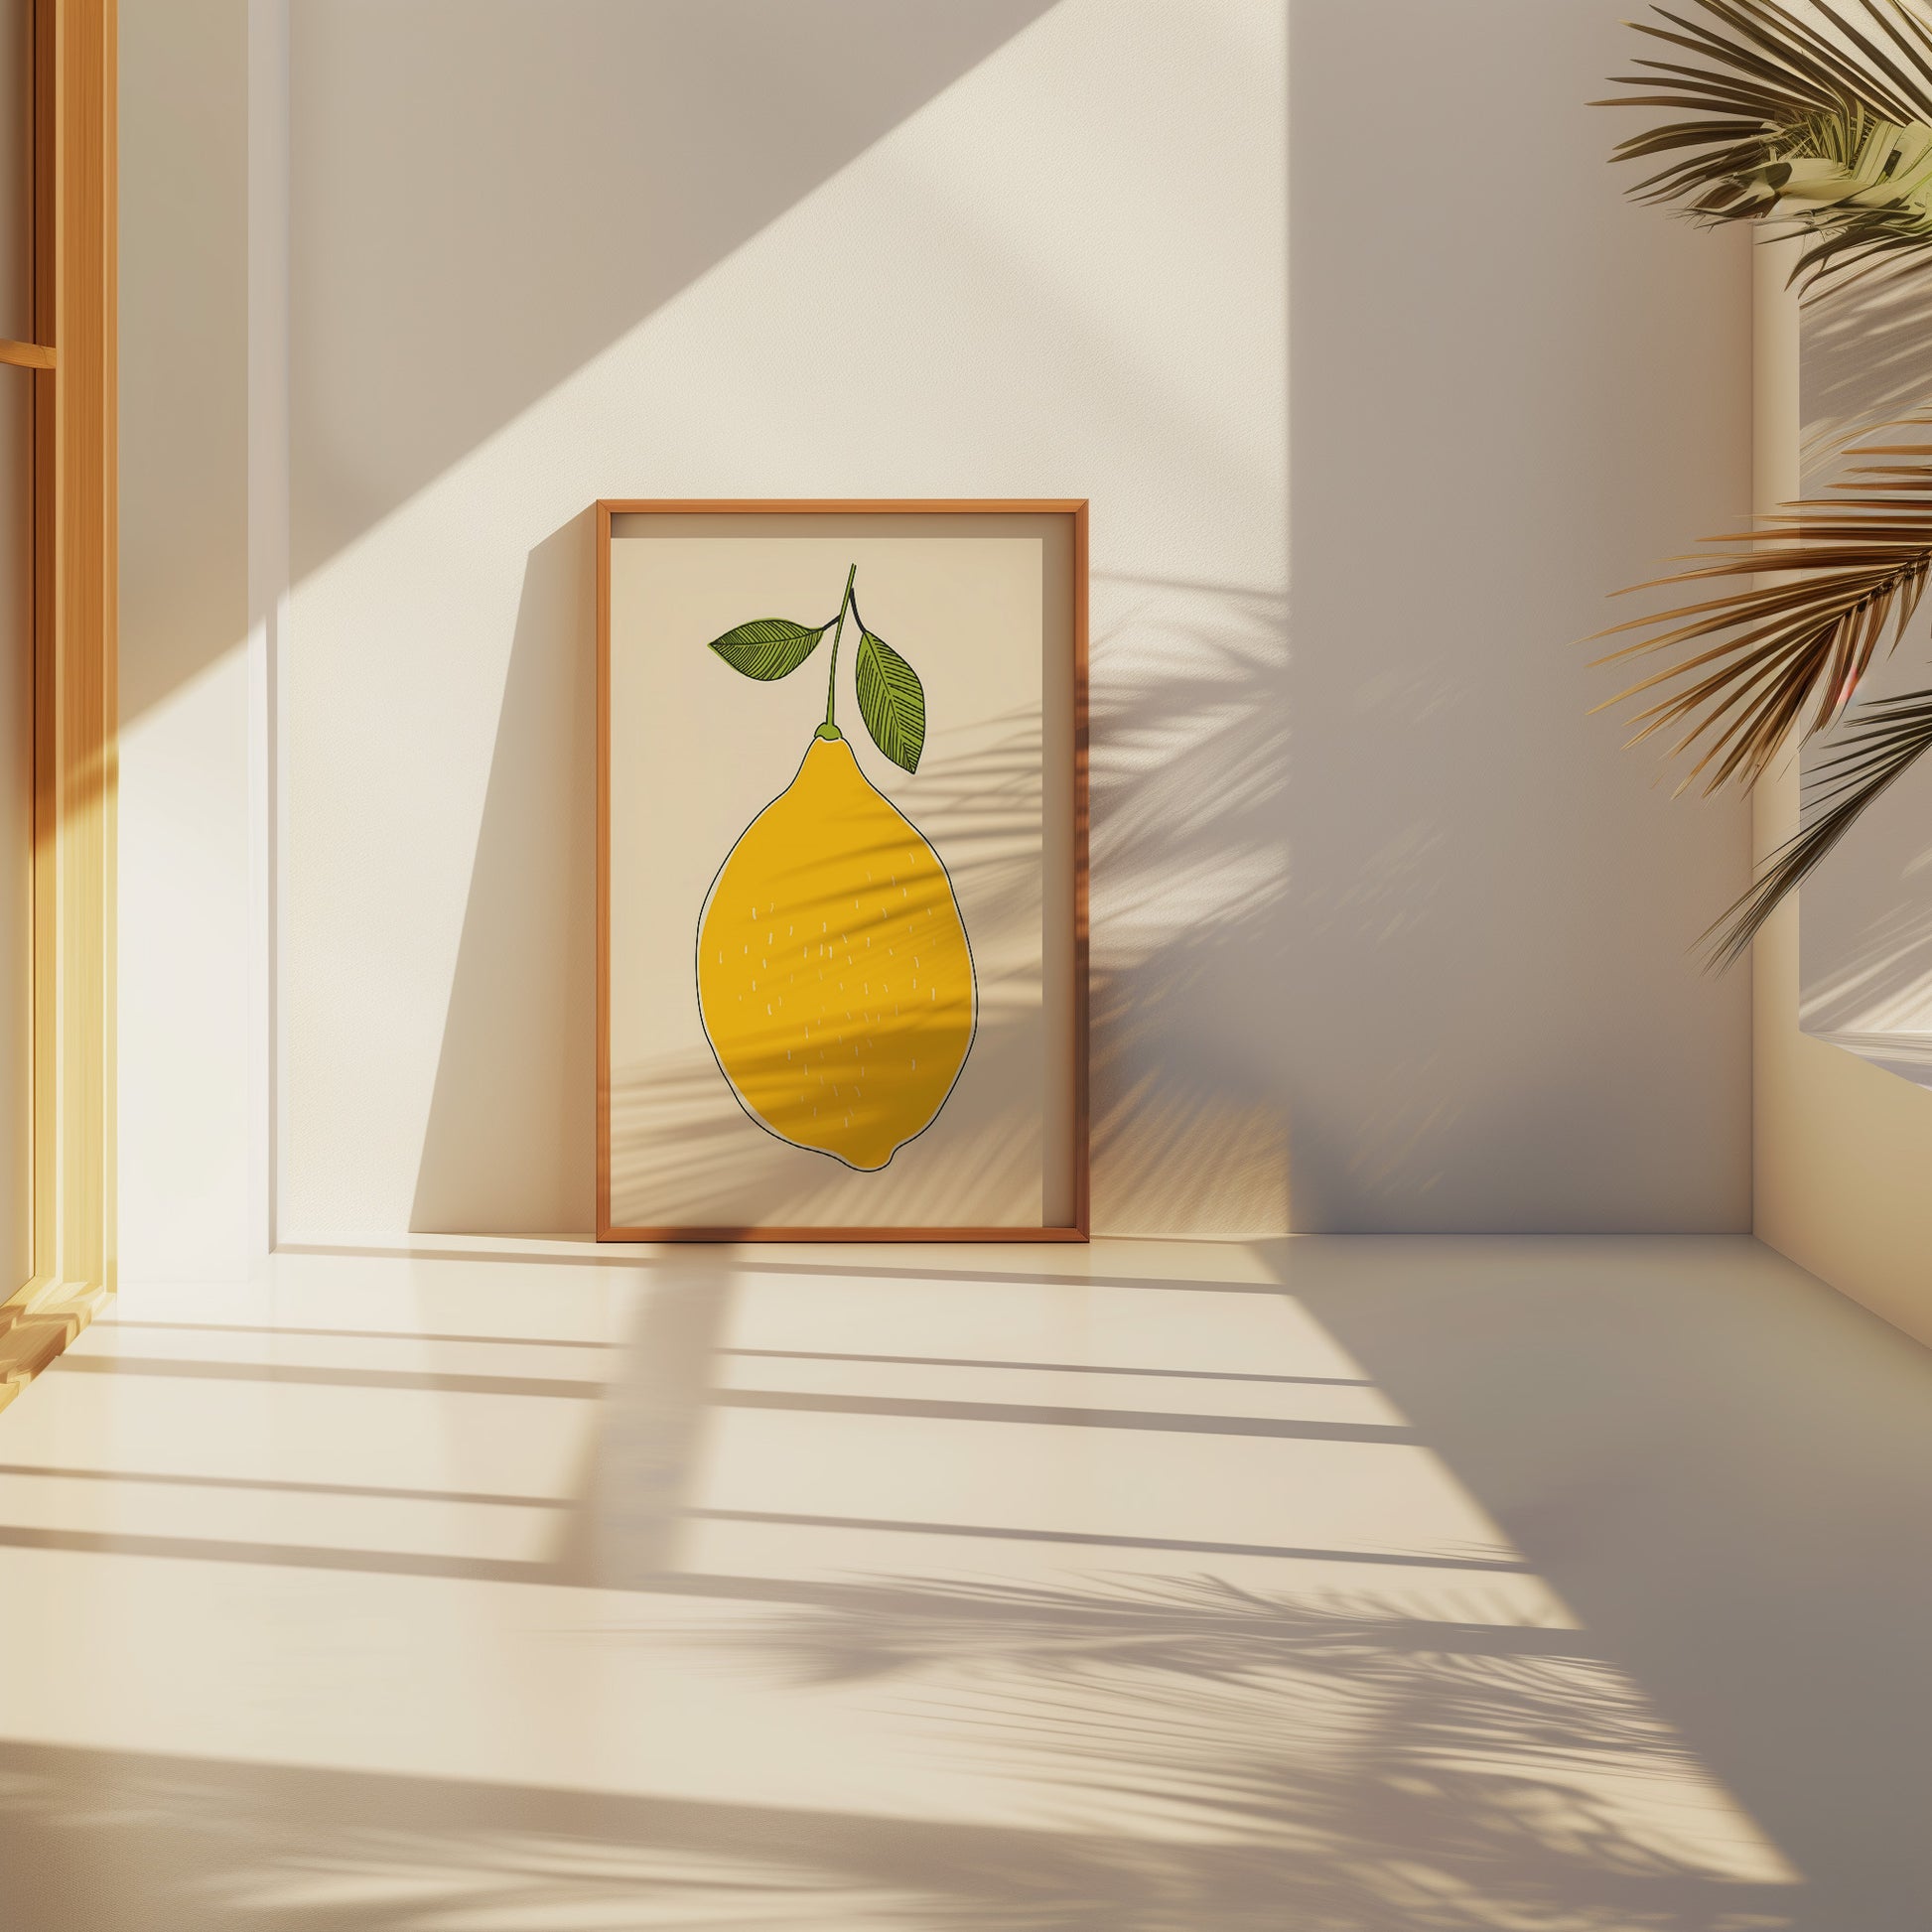 A framed illustration of a yellow pear standing on a floor in a sunlit room with shadows.